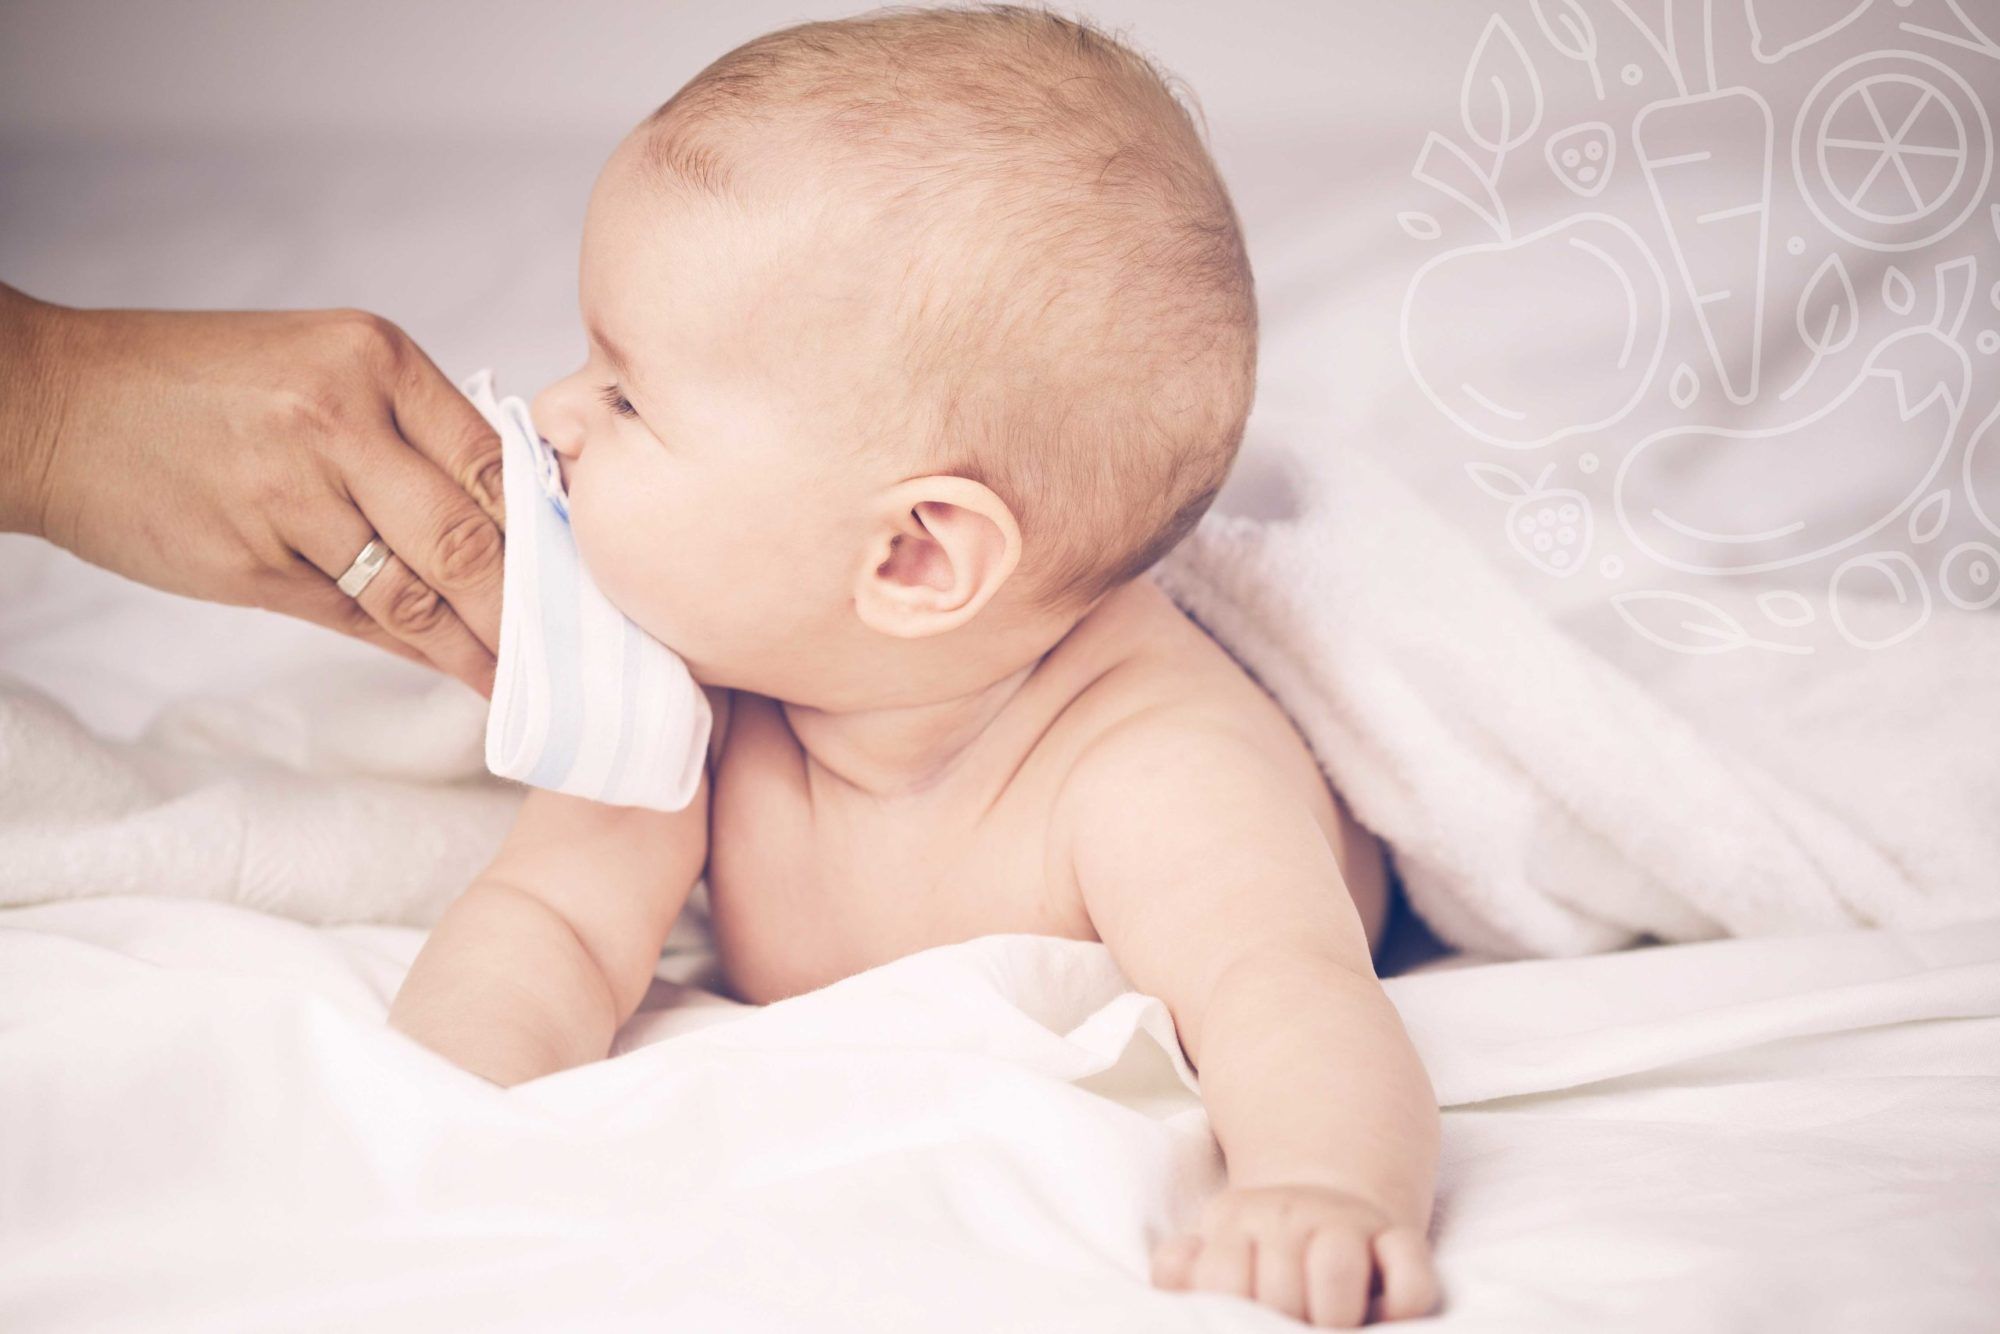 How to reduce your baby’s asthma and allergy risk